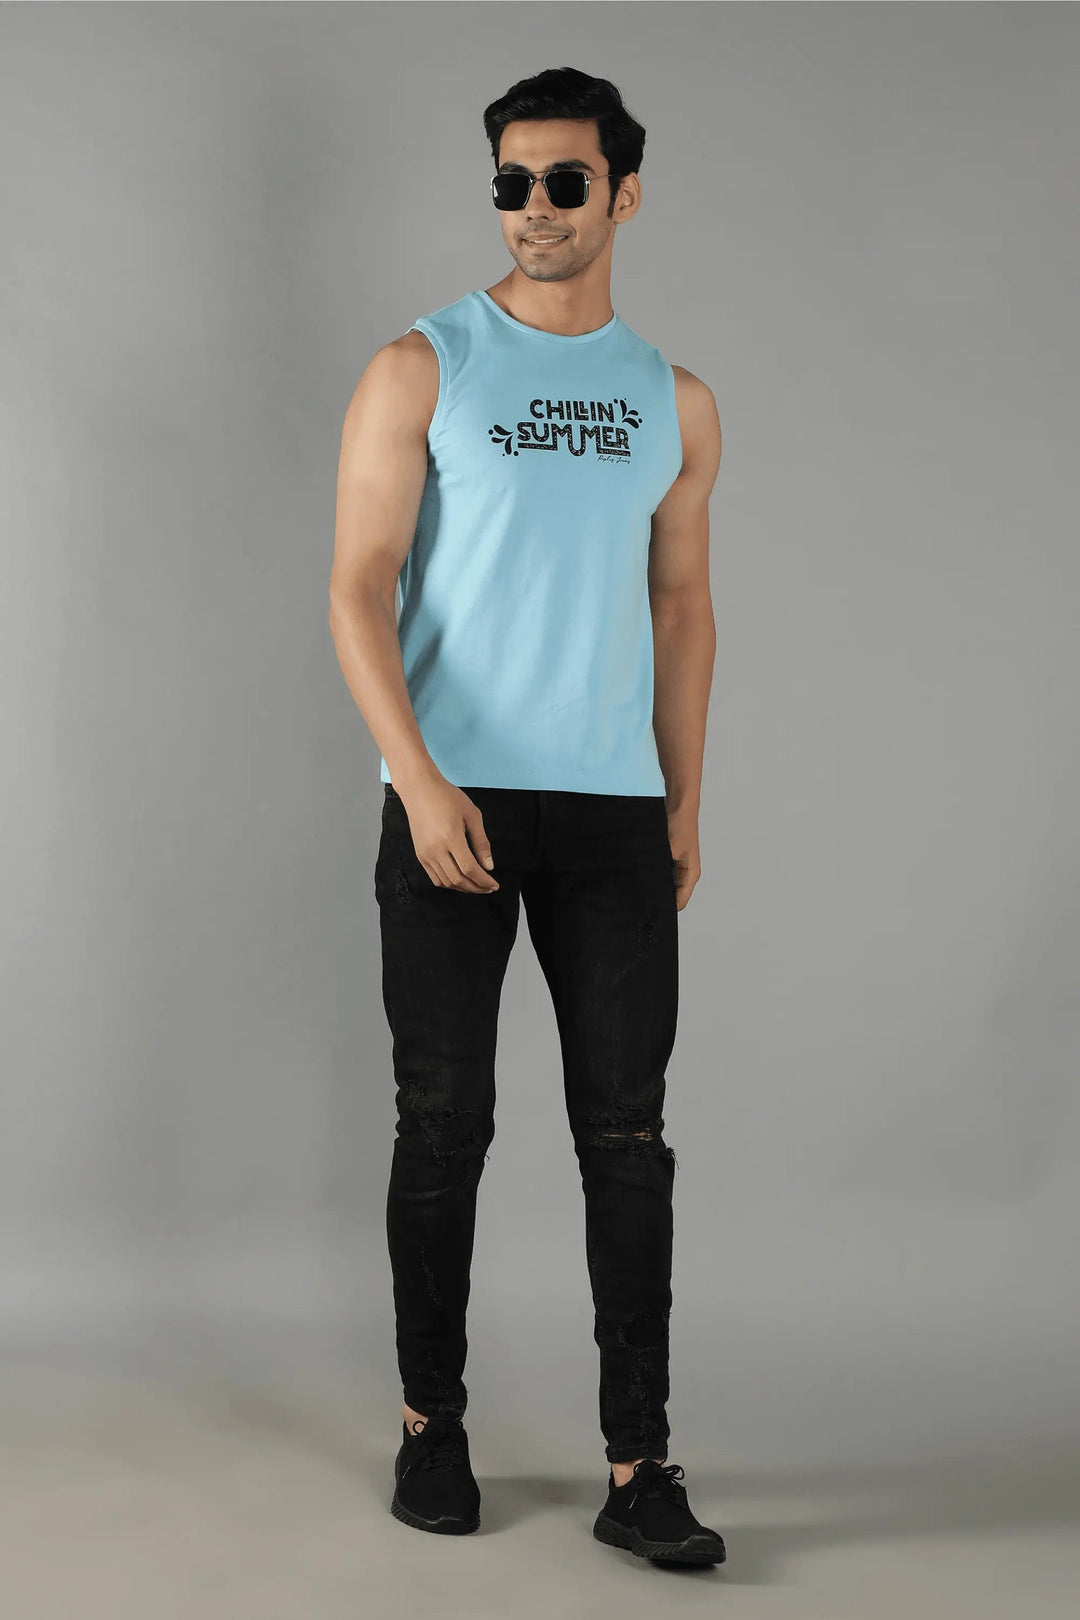 Chill summer tank top Premium design and fabric. It's really conmfort for the summer season.